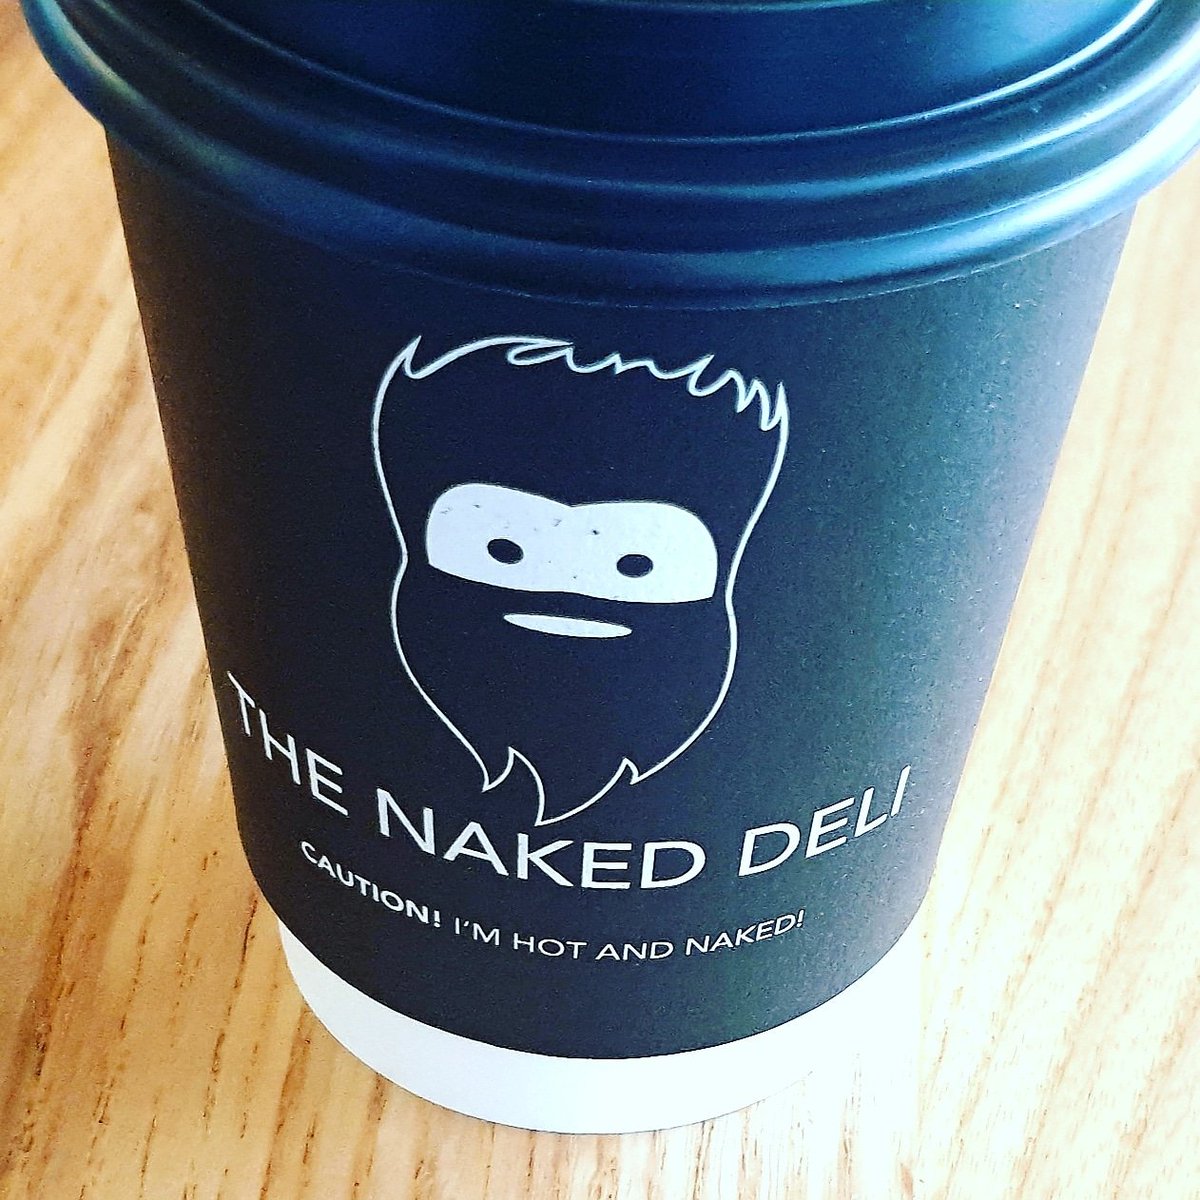 Another recent client for 2019 is The Naked Deli, 5 cafe's in NCL area! It has been good to meet the team this morning, with discussions of potentially interesting projects soon! 😃 ☕ 😎 🍽

#TheNakedDeli #Advertise1 #ThisIsMine #Heaton #ClosestClientToHome #NewClientFor2019